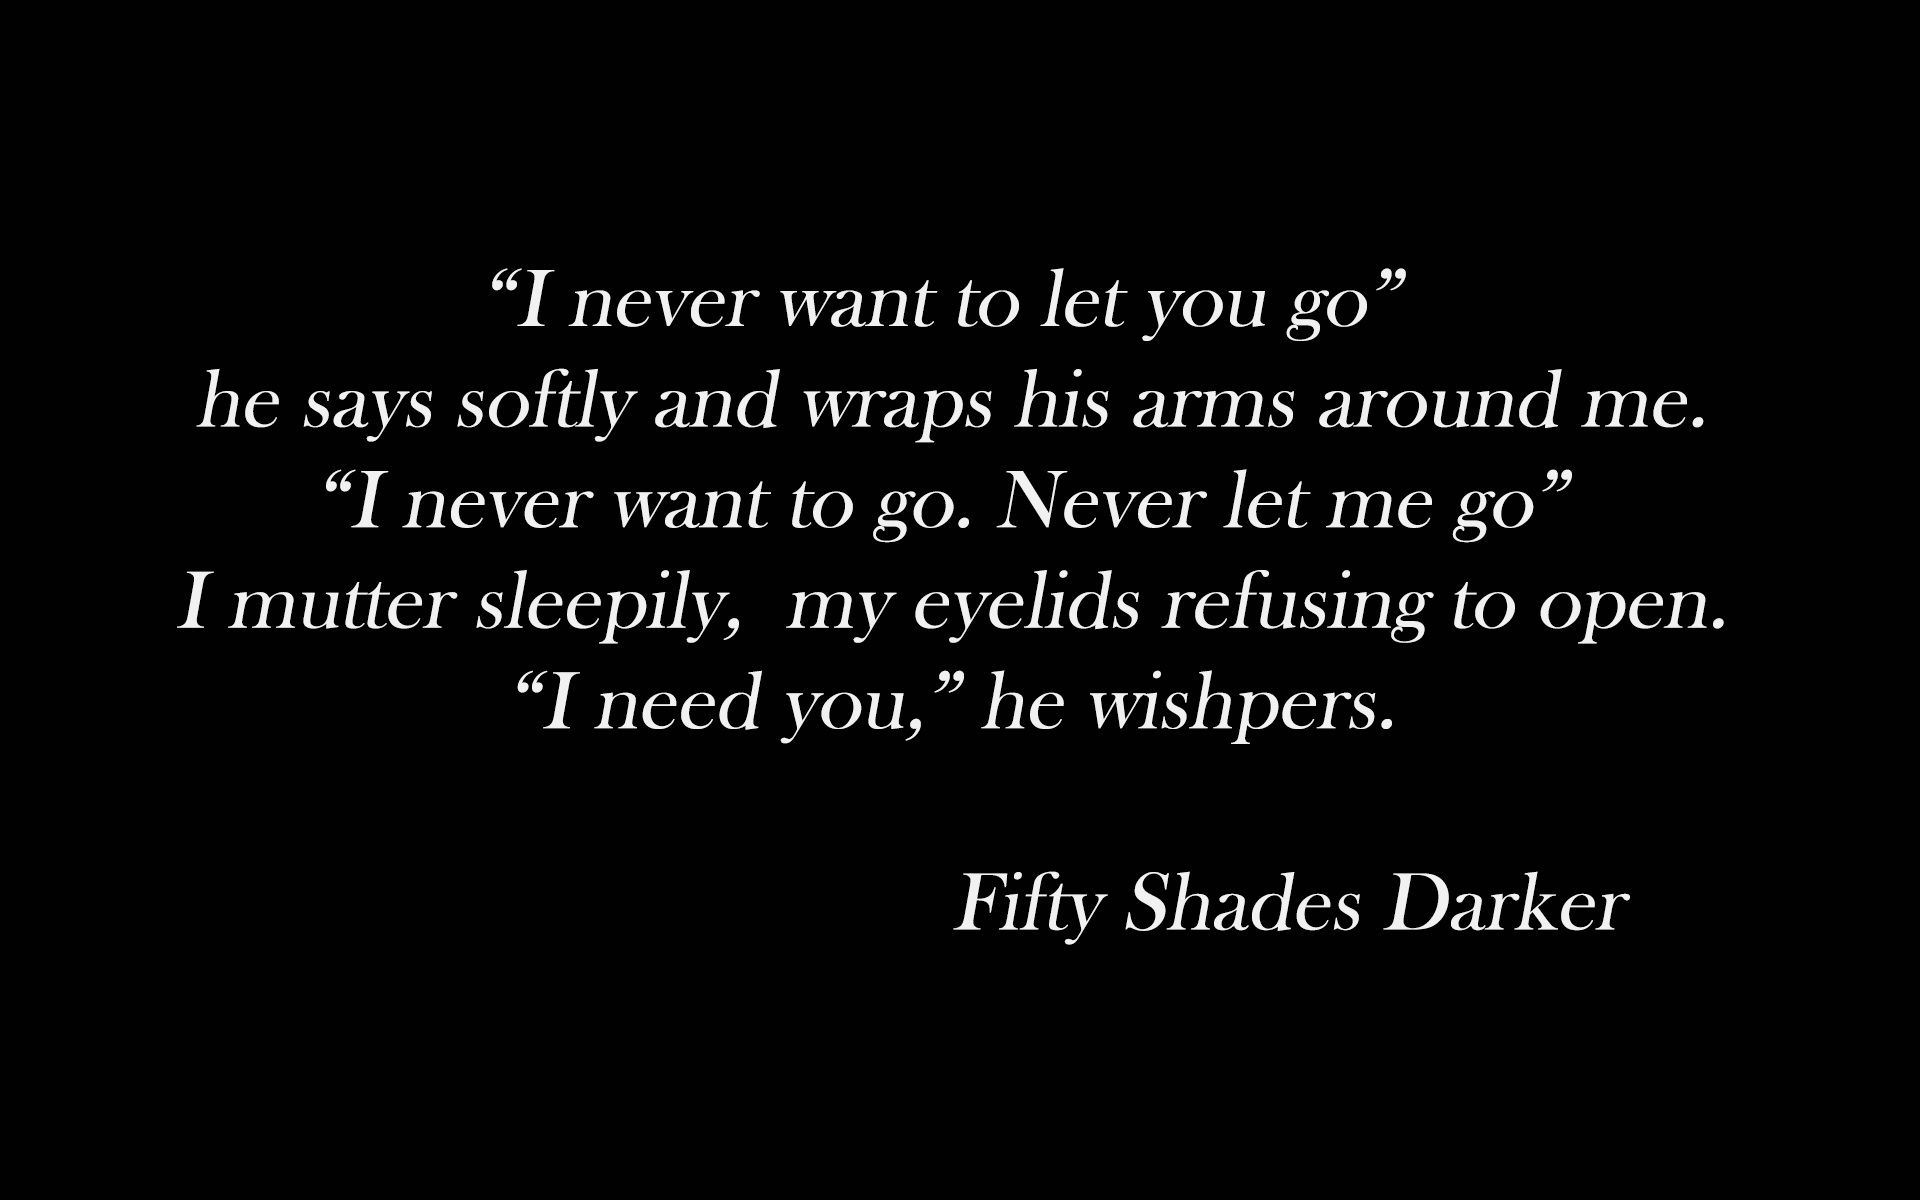 Fifty Shades Darker Quotes. QuotesGram